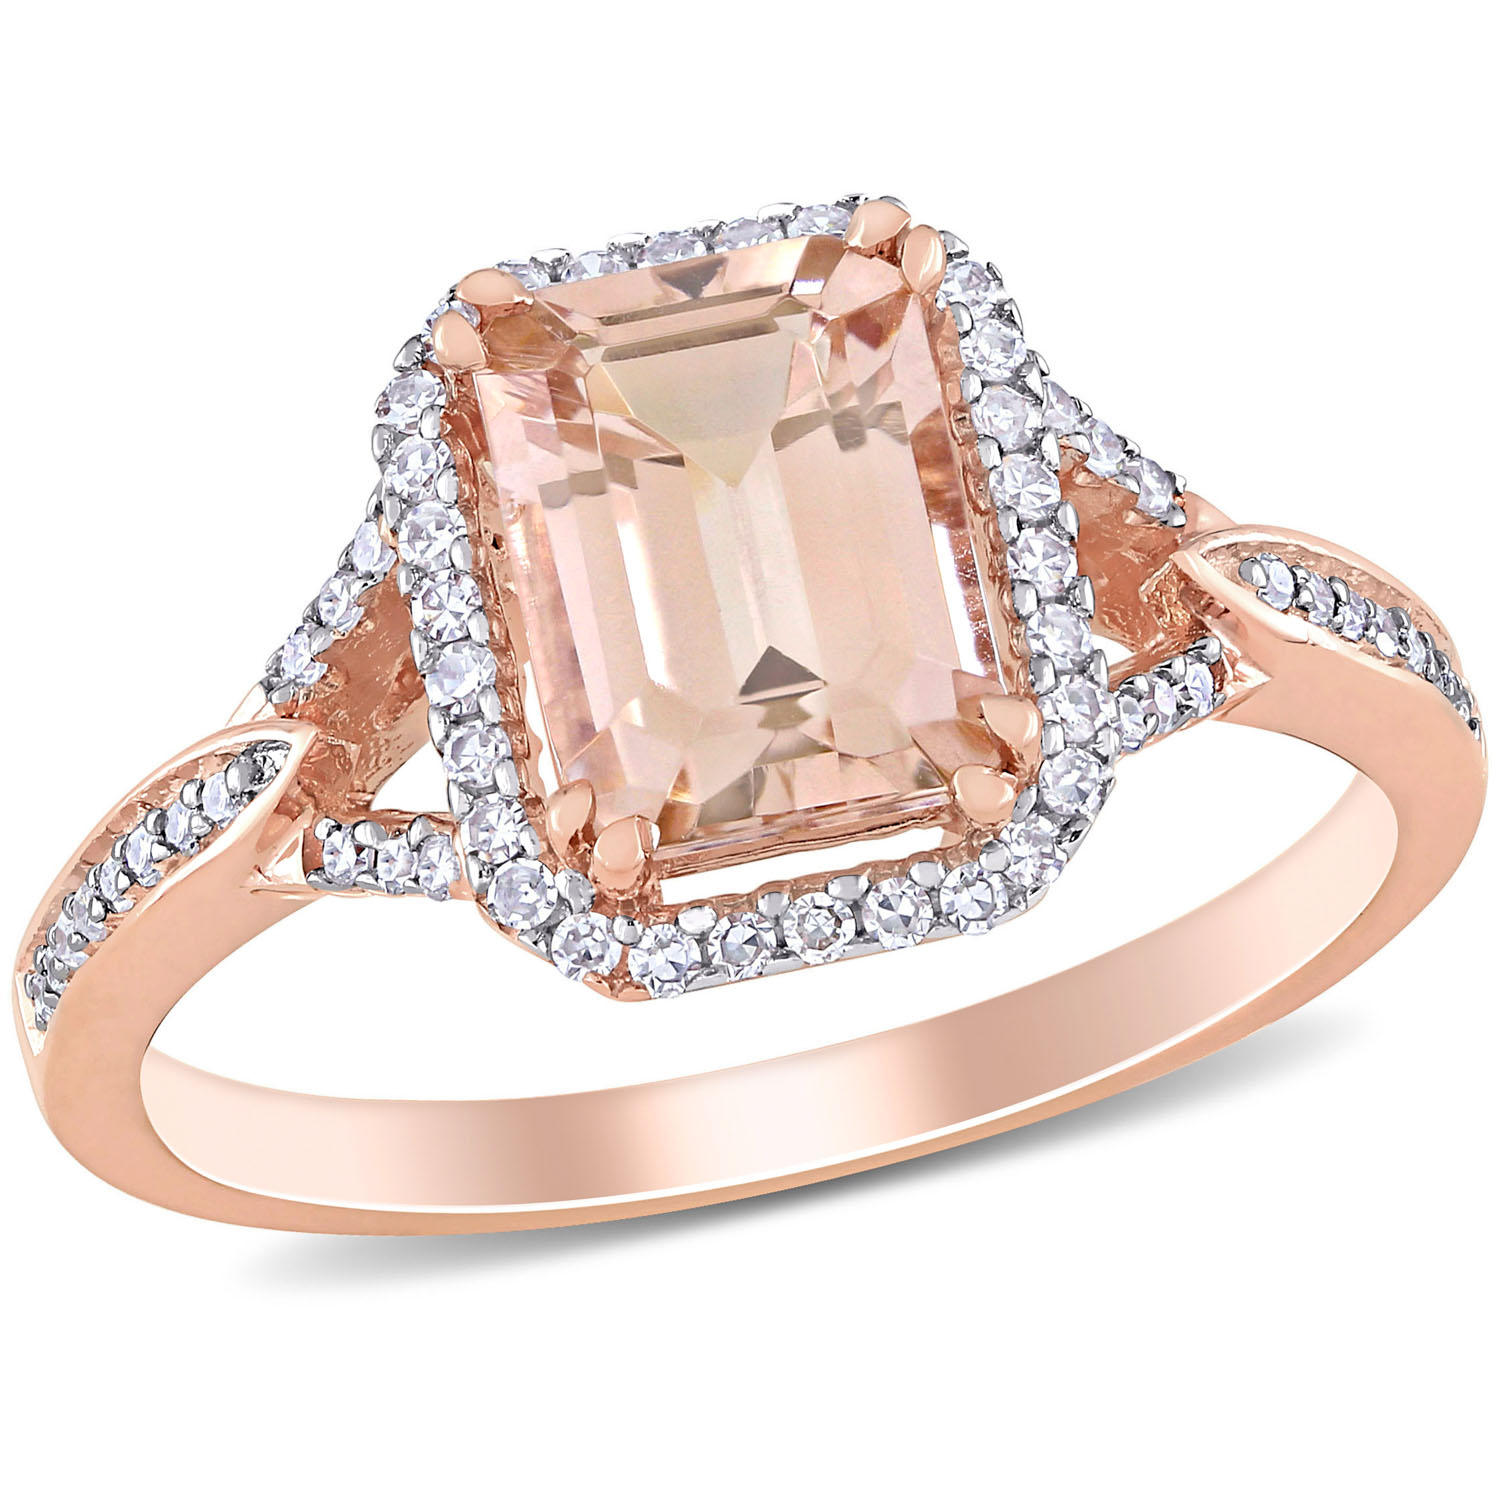 1.37 CT. T.G.W. Morganite and 0.2 CT. T.W. Diamond Halo Engagement Ring in 14k Rose Gold 4.5